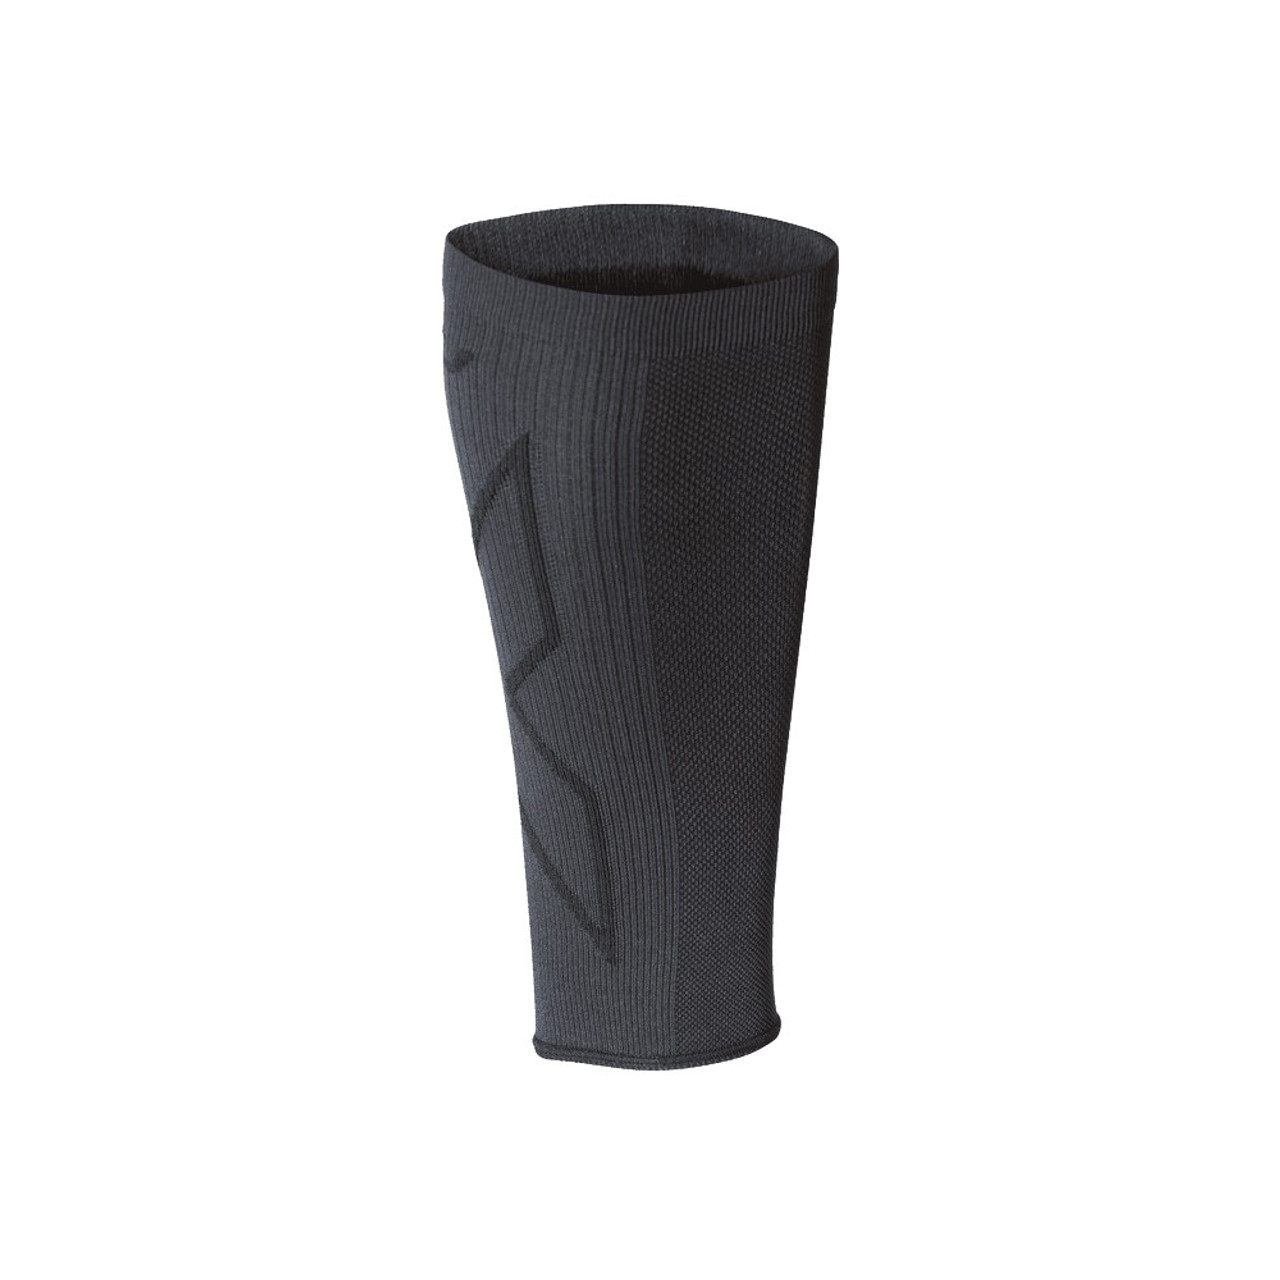 2xu Compression Sleeves Size Chart